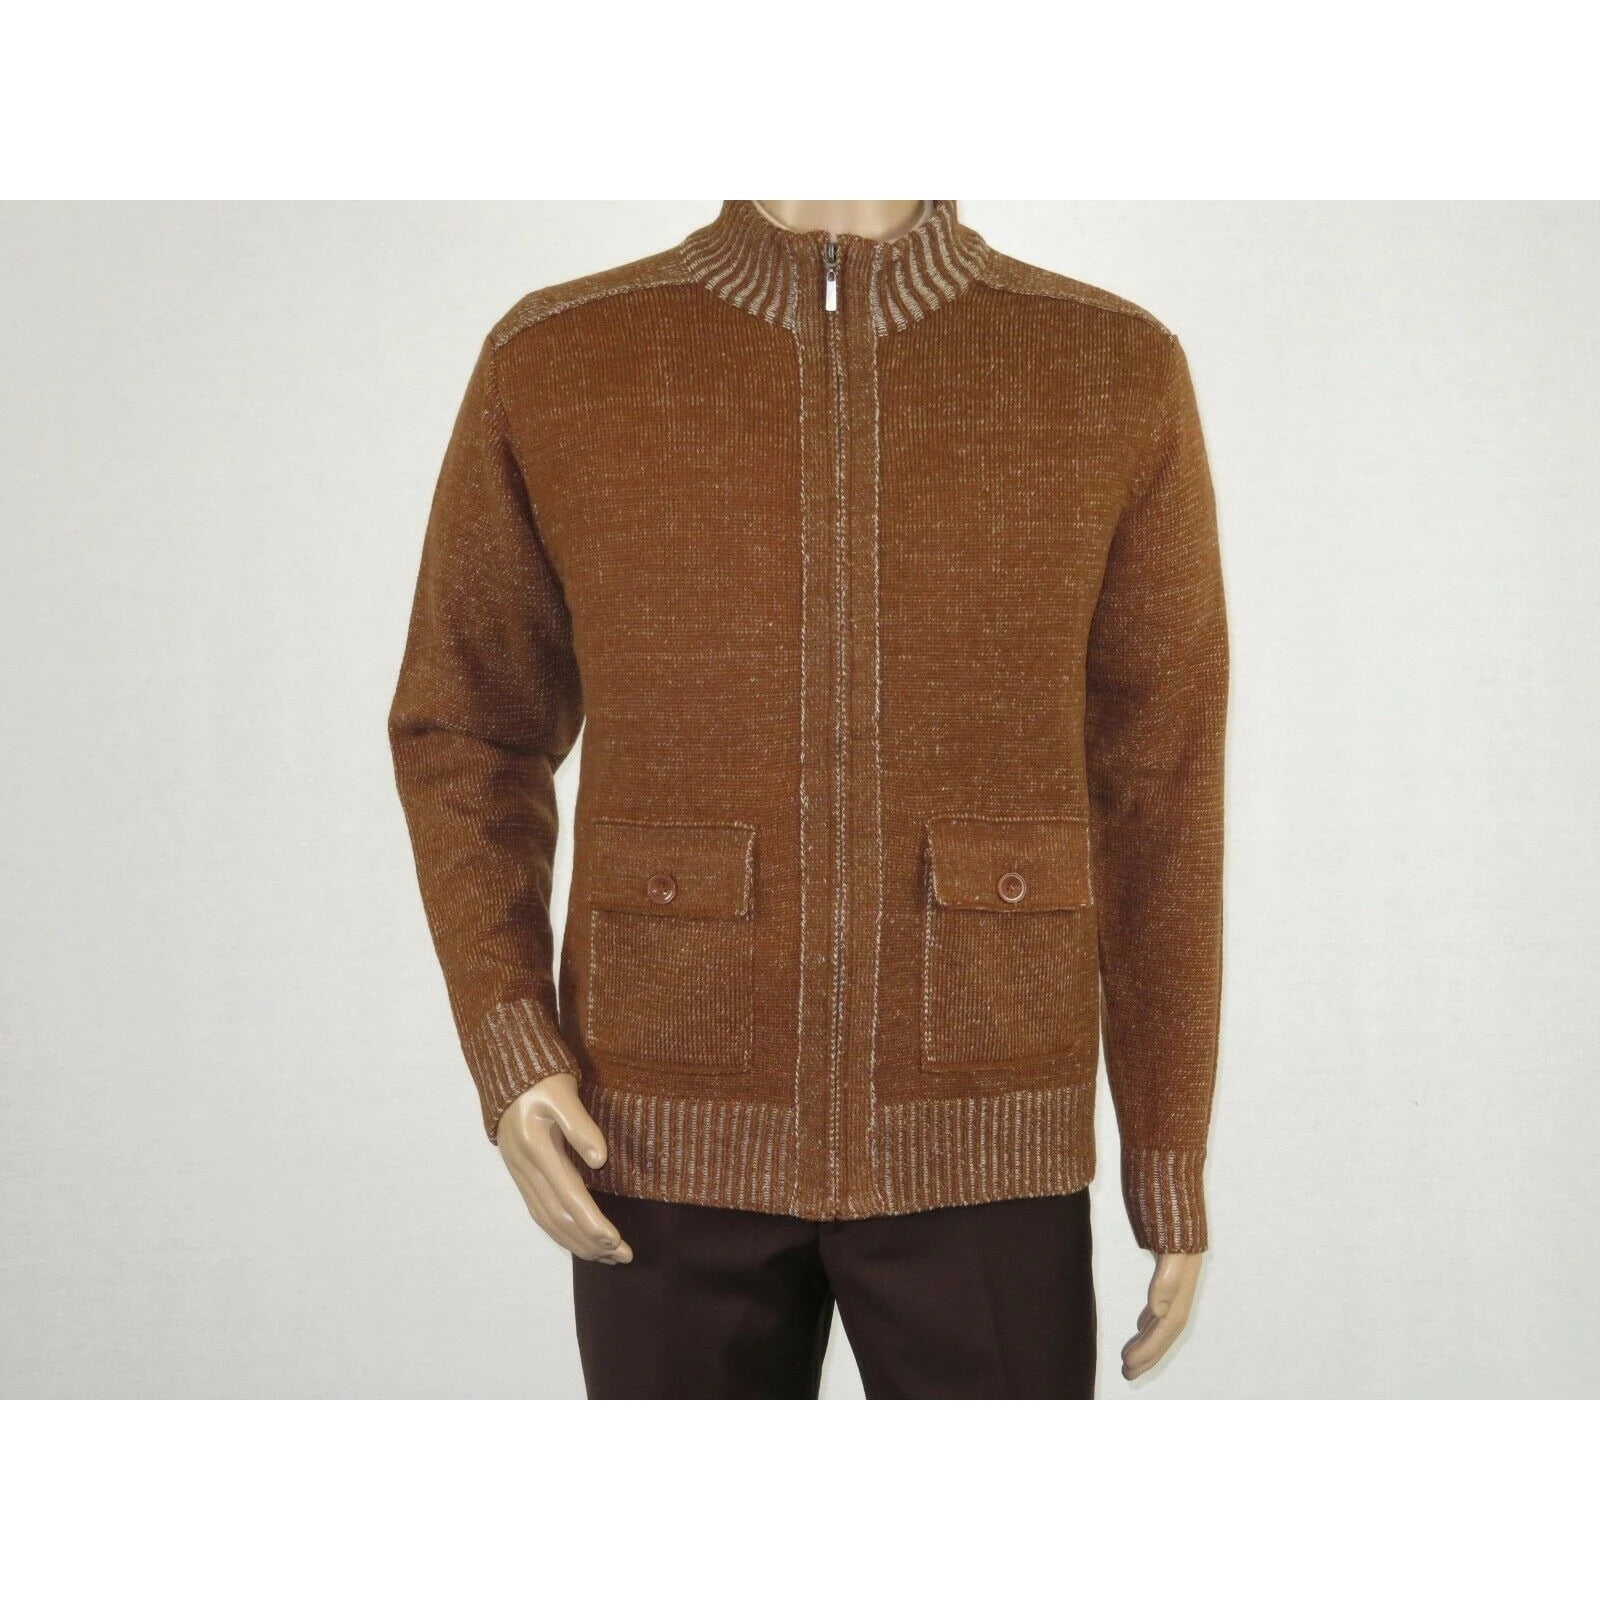 INSERCH CARDIGAN ZIPPER FRONT SWEATERS  WITH CONTRAST ELBOW PATCHES BROWN